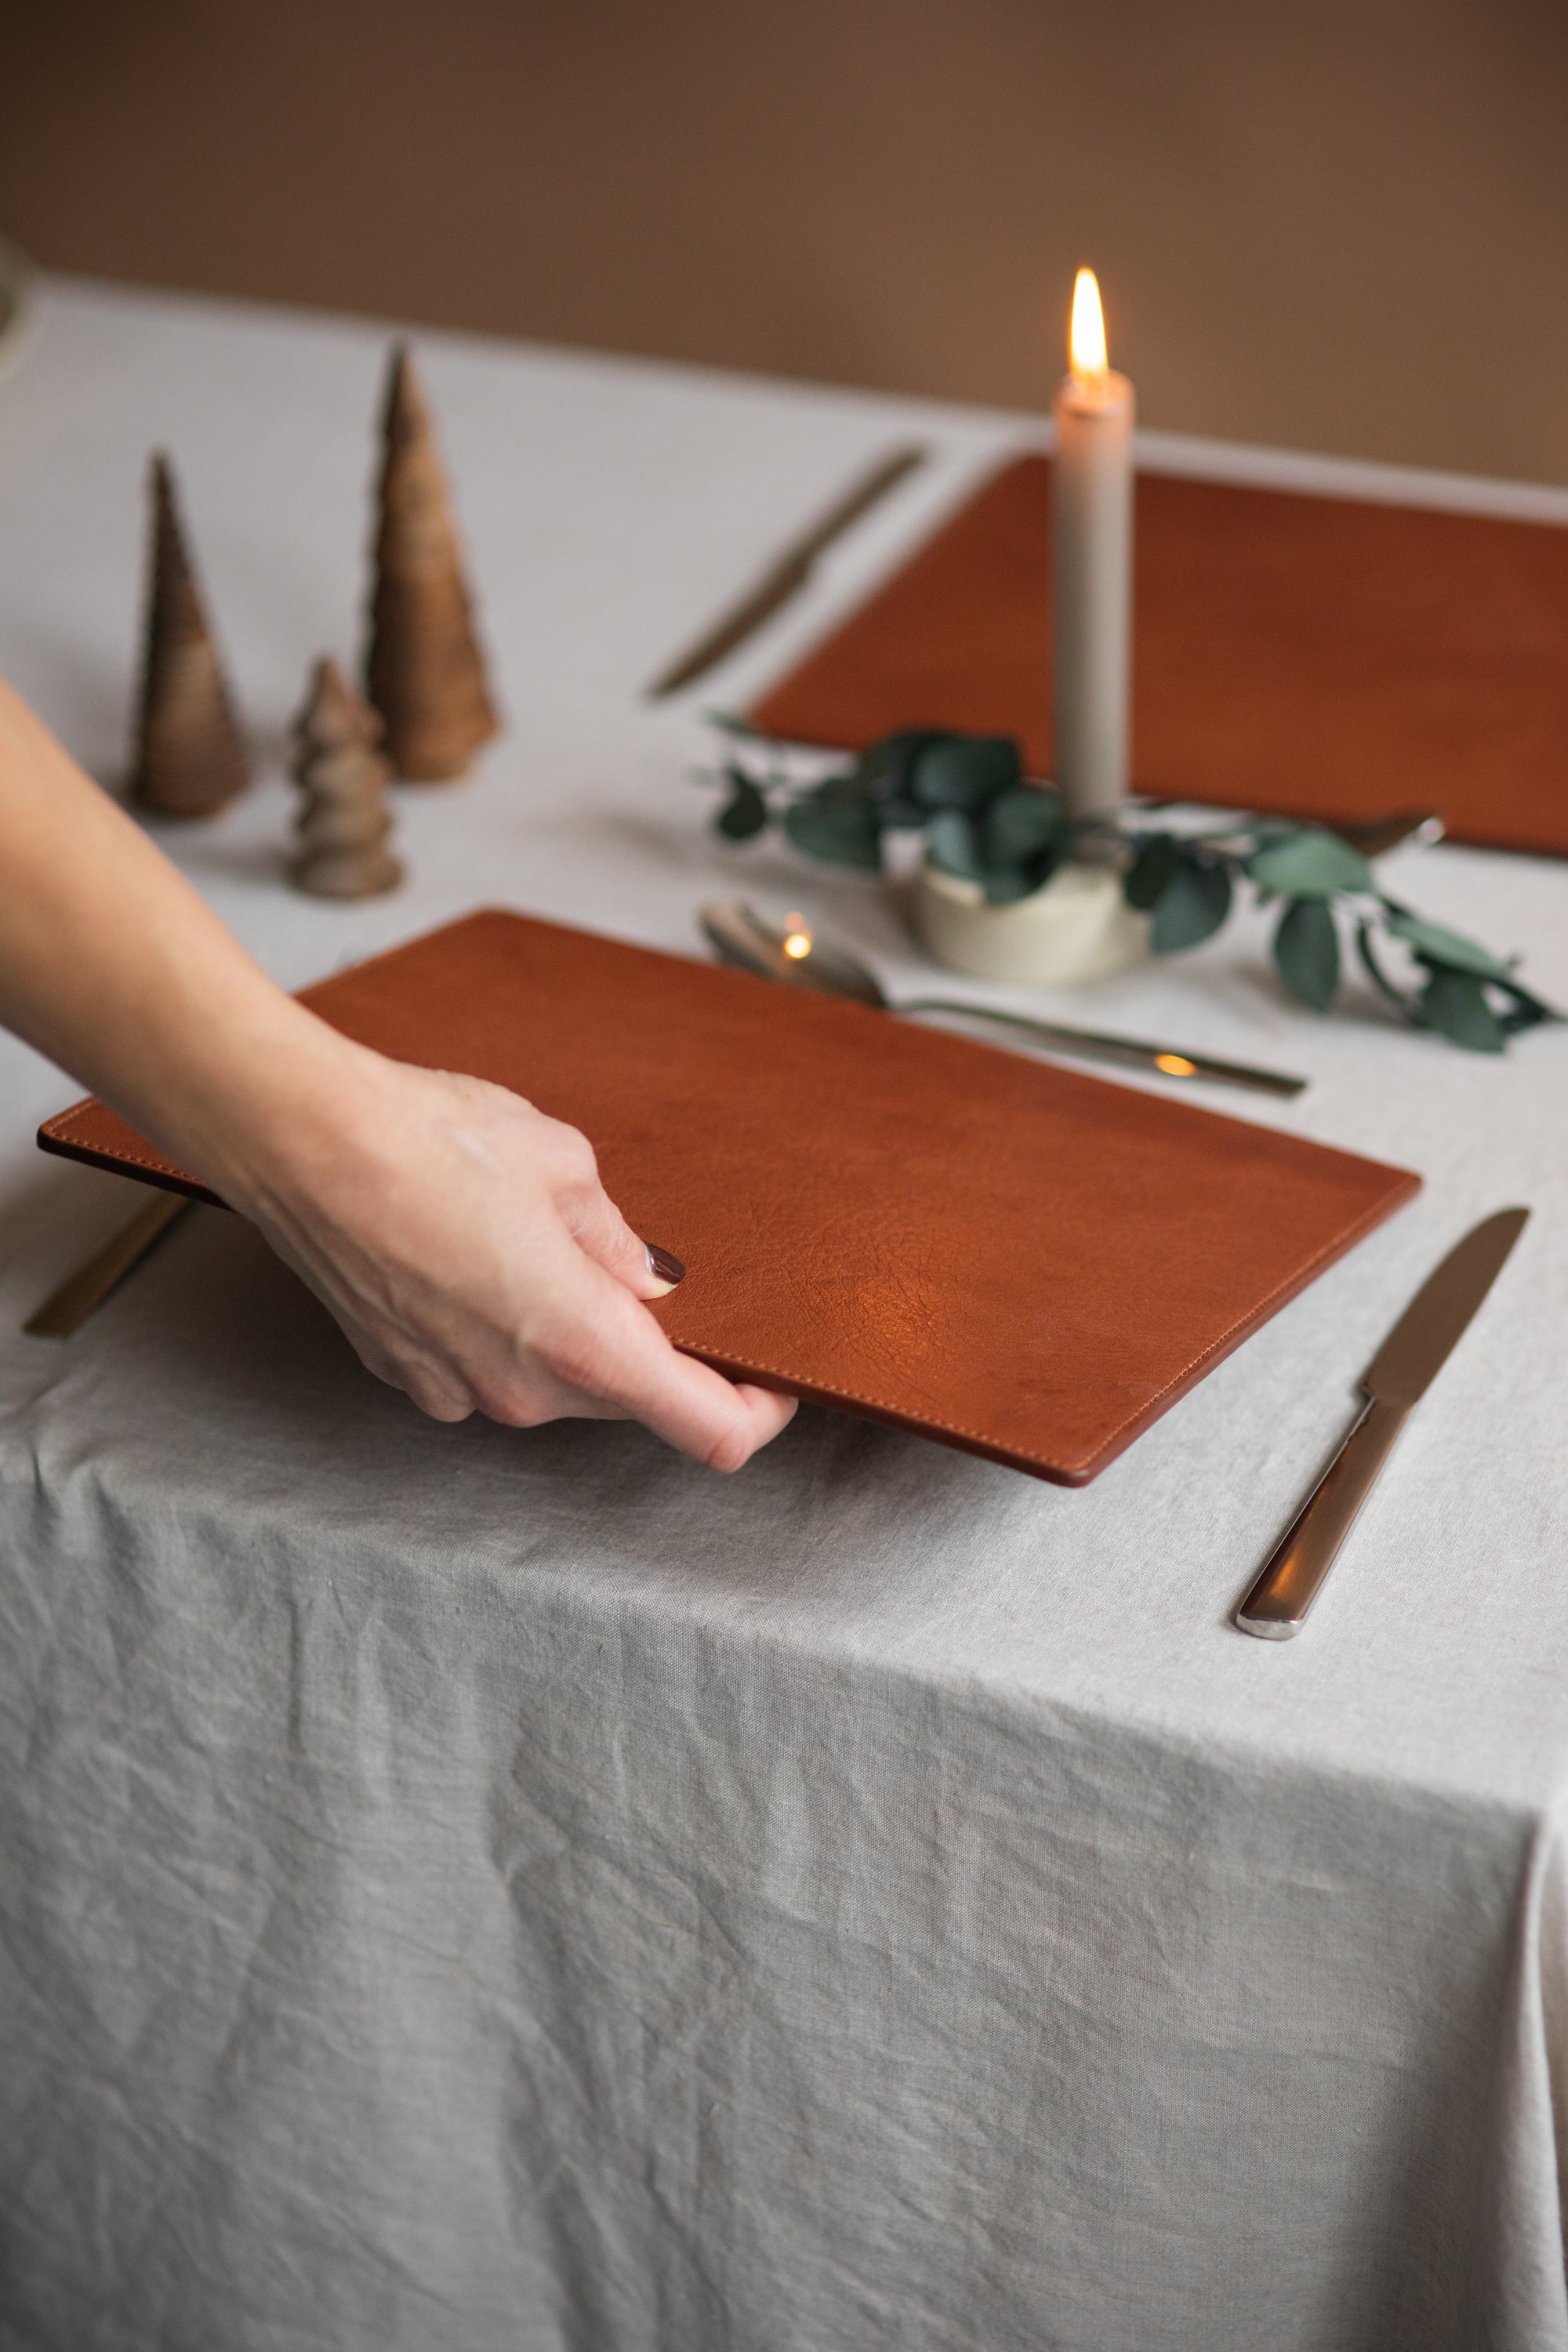 How to style a home with leather accessories